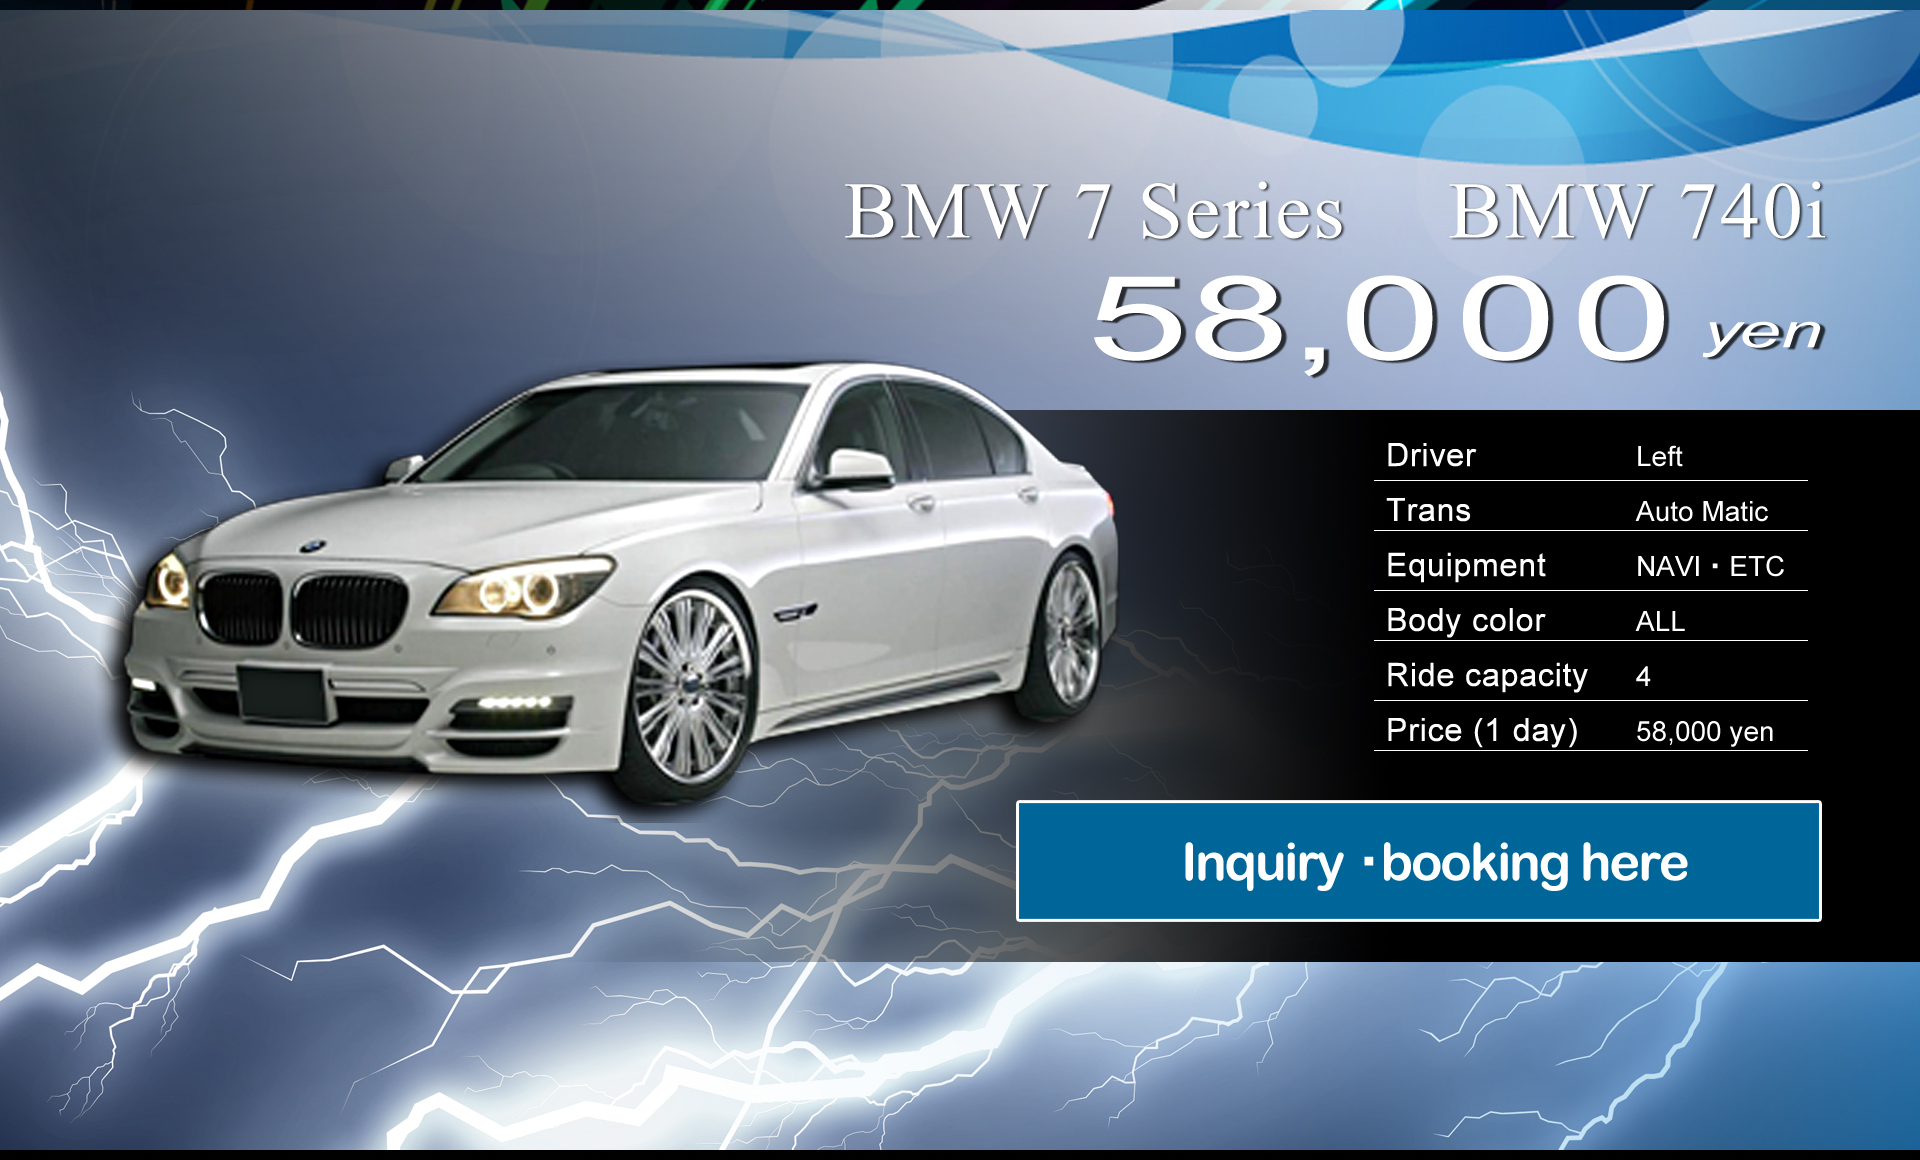 BMW 740i Inquiry　booking here